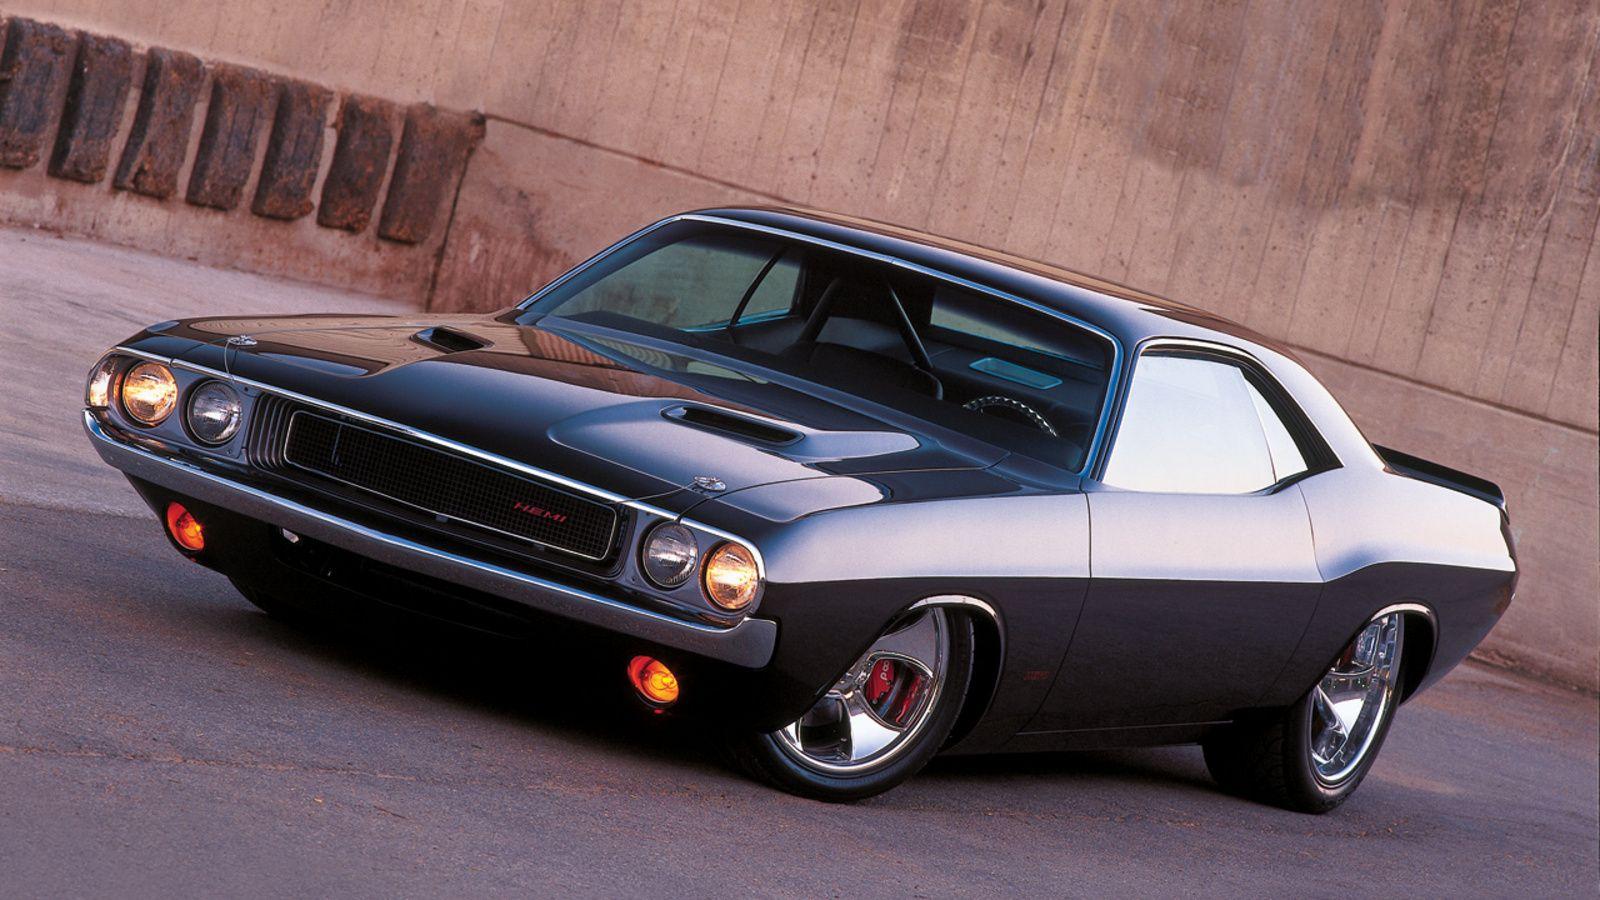 Challenger. Nice Rides. Car picture, Muscles